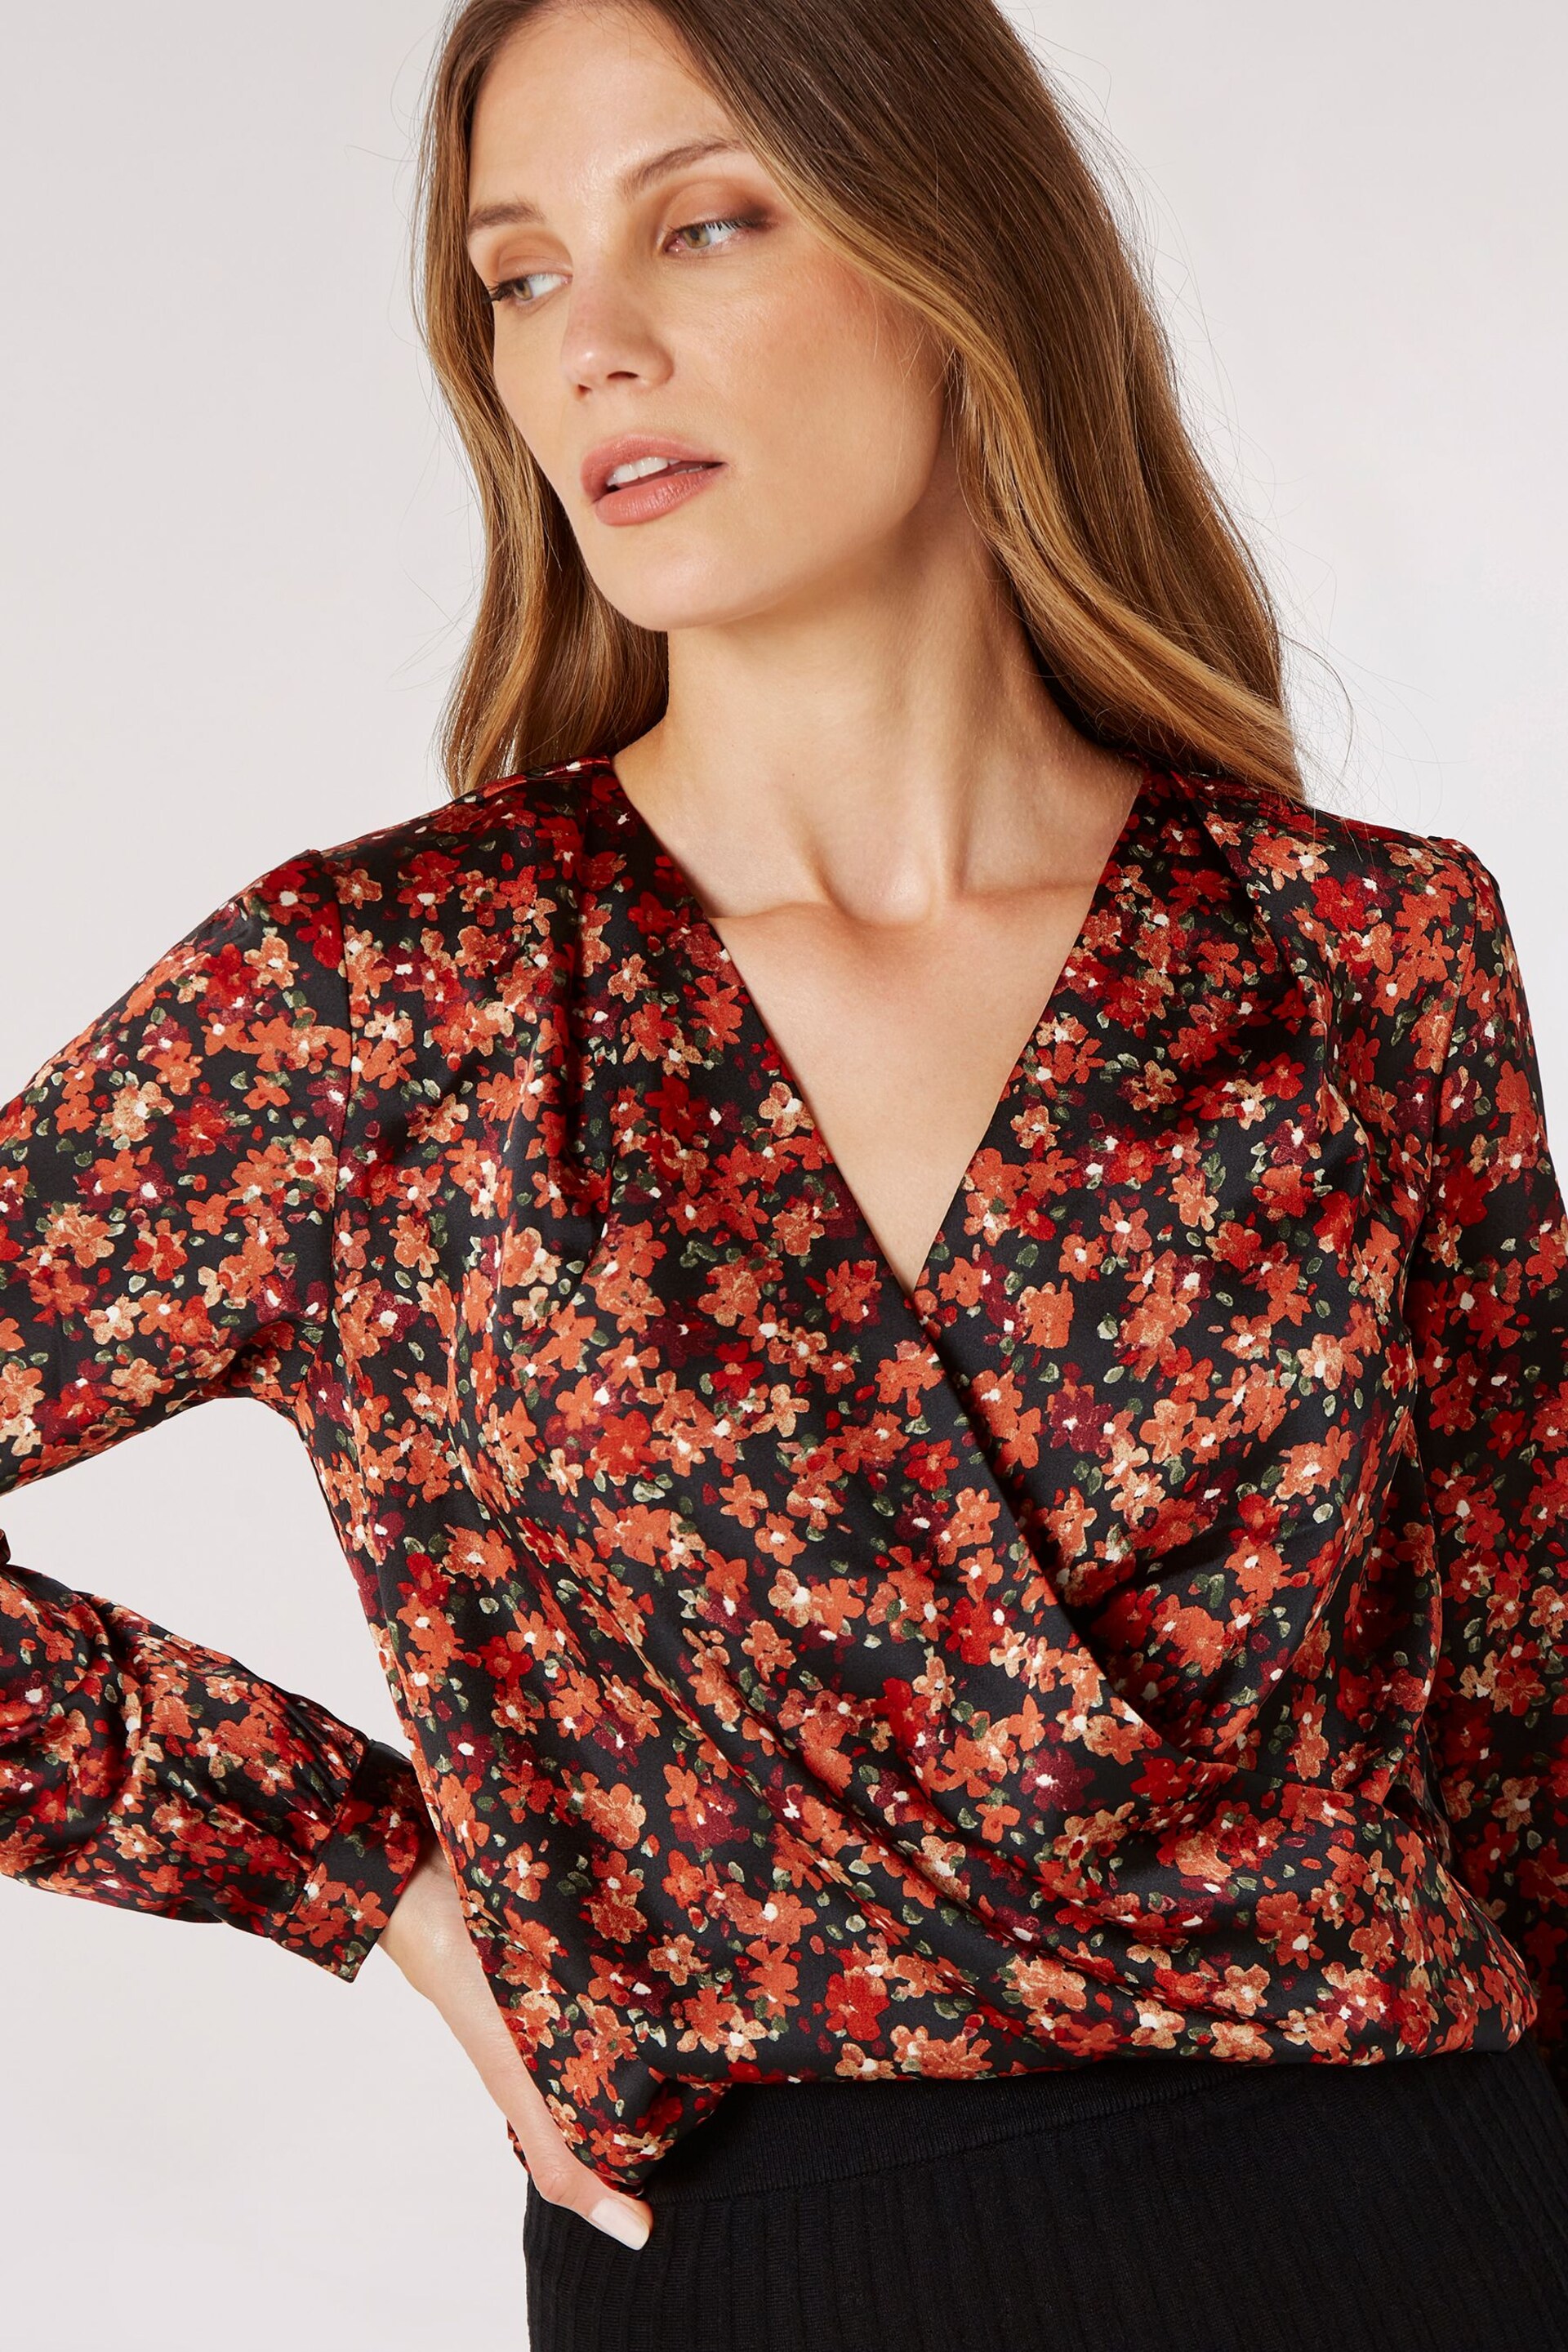 Apricot Black Painterly Floral Wrap Top - Image 4 of 4